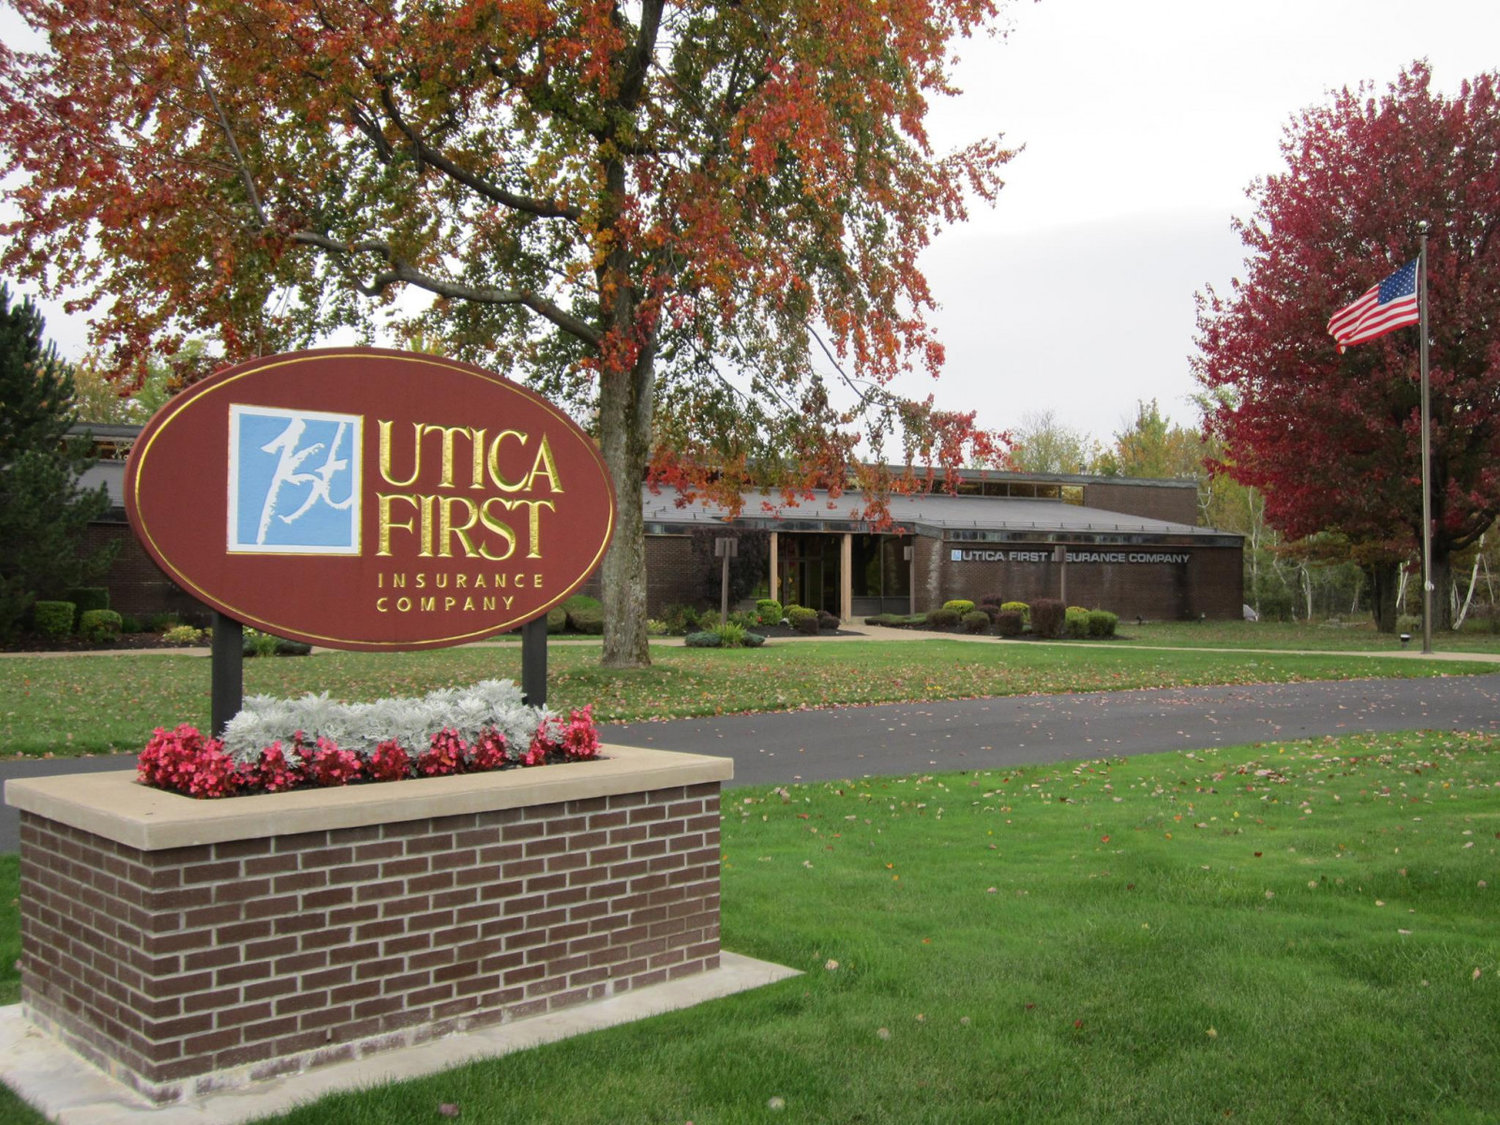 Utica First Insurance Company in Oriskany is celebrating 120 years in business this year.